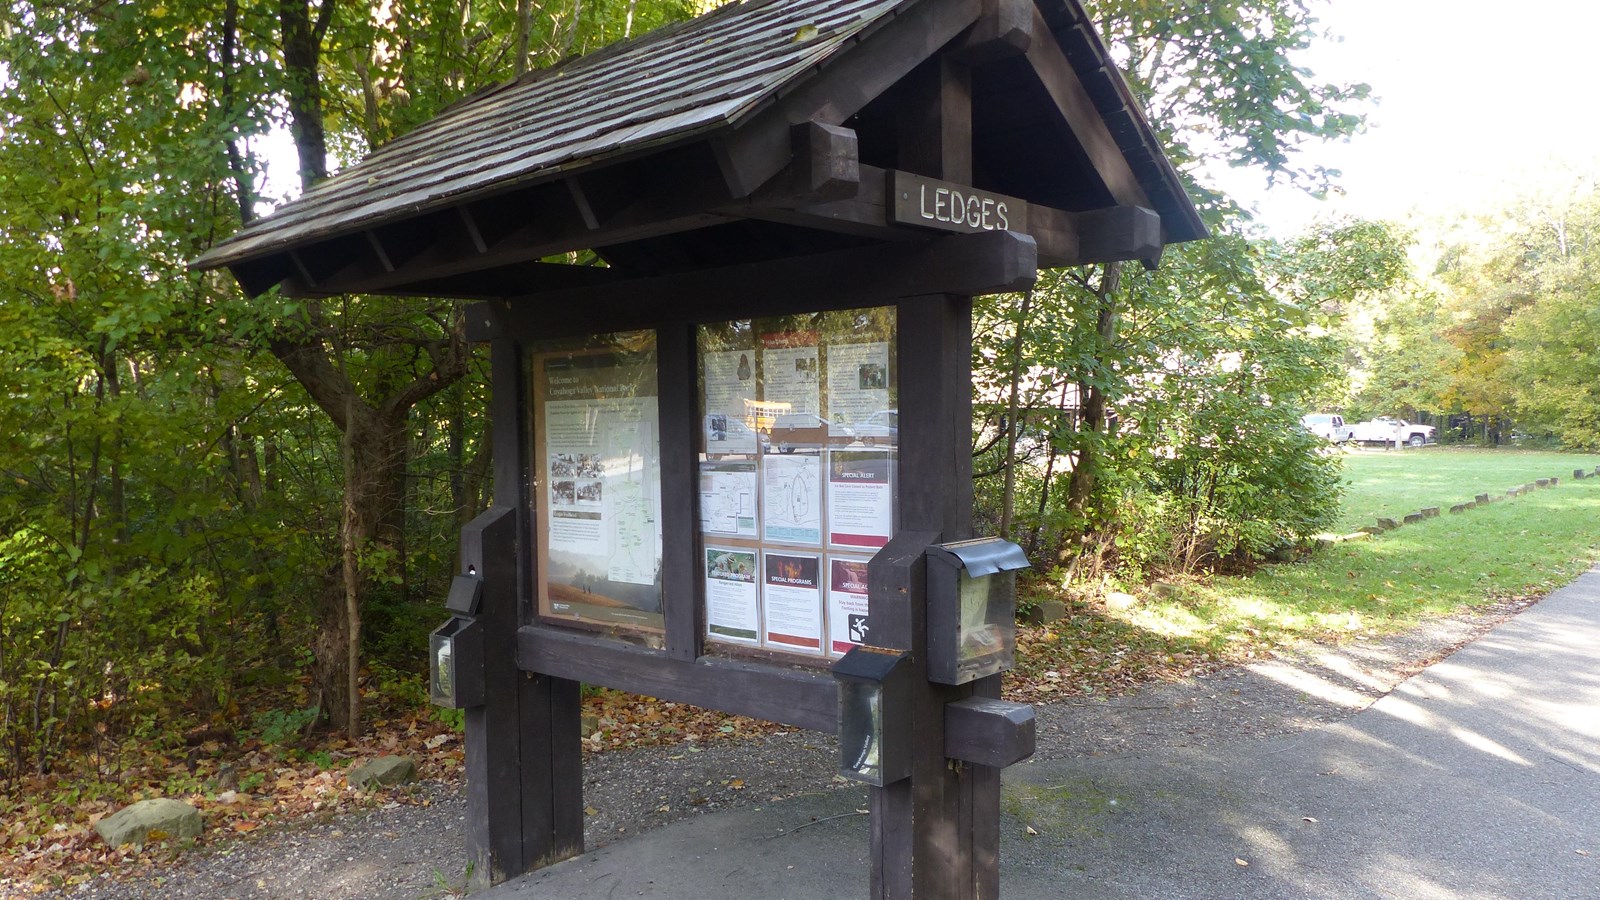 A two sided bulletin board along a paved road; a “Ledges” sign just below the peaked roof.